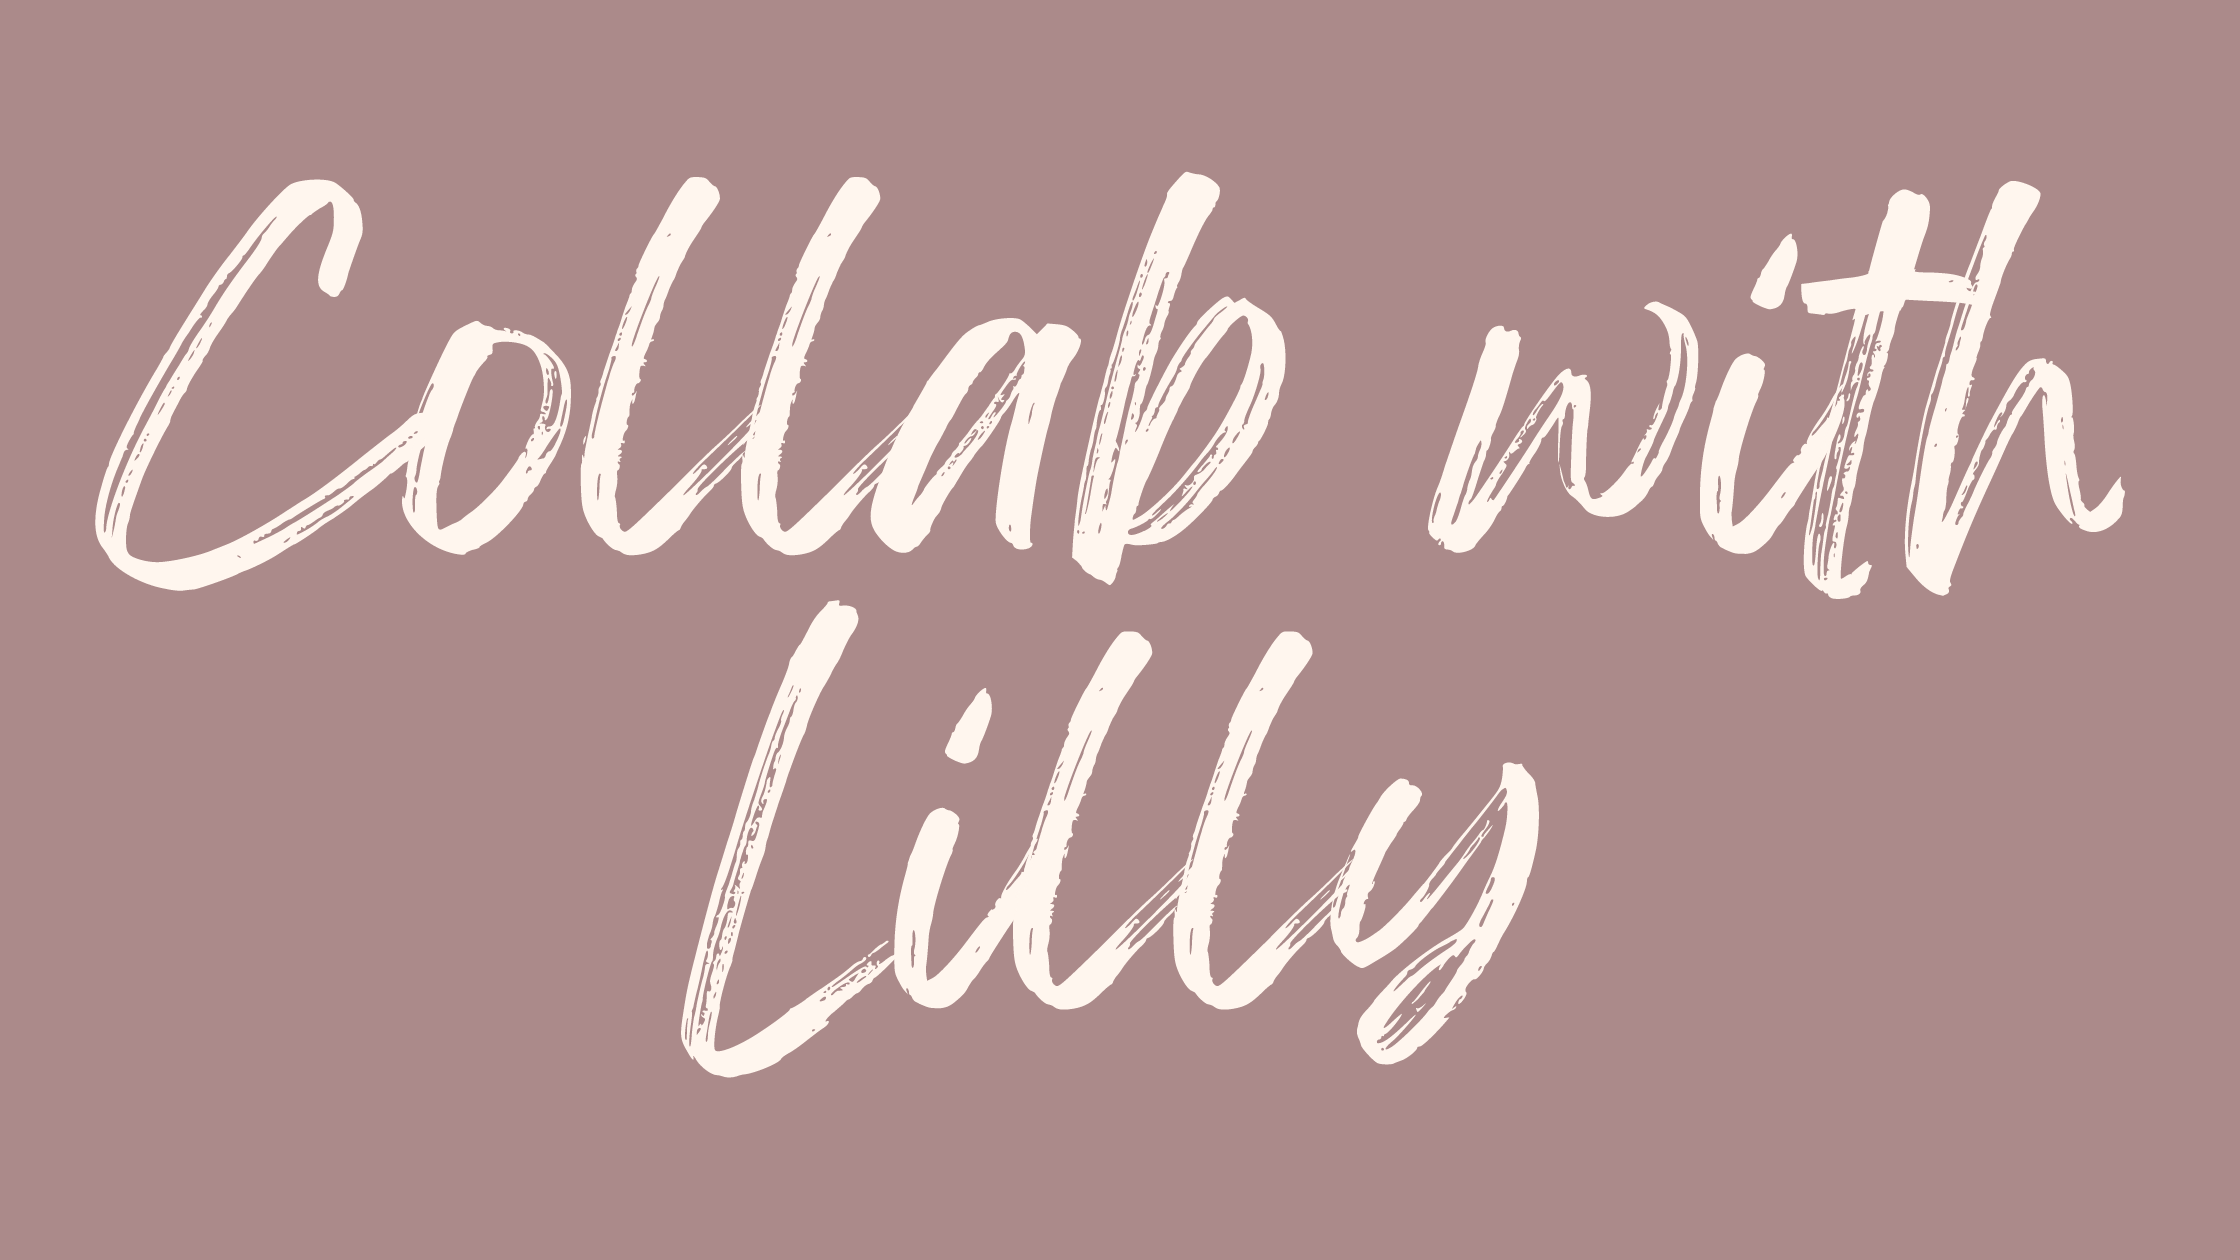 Collab with Lilly